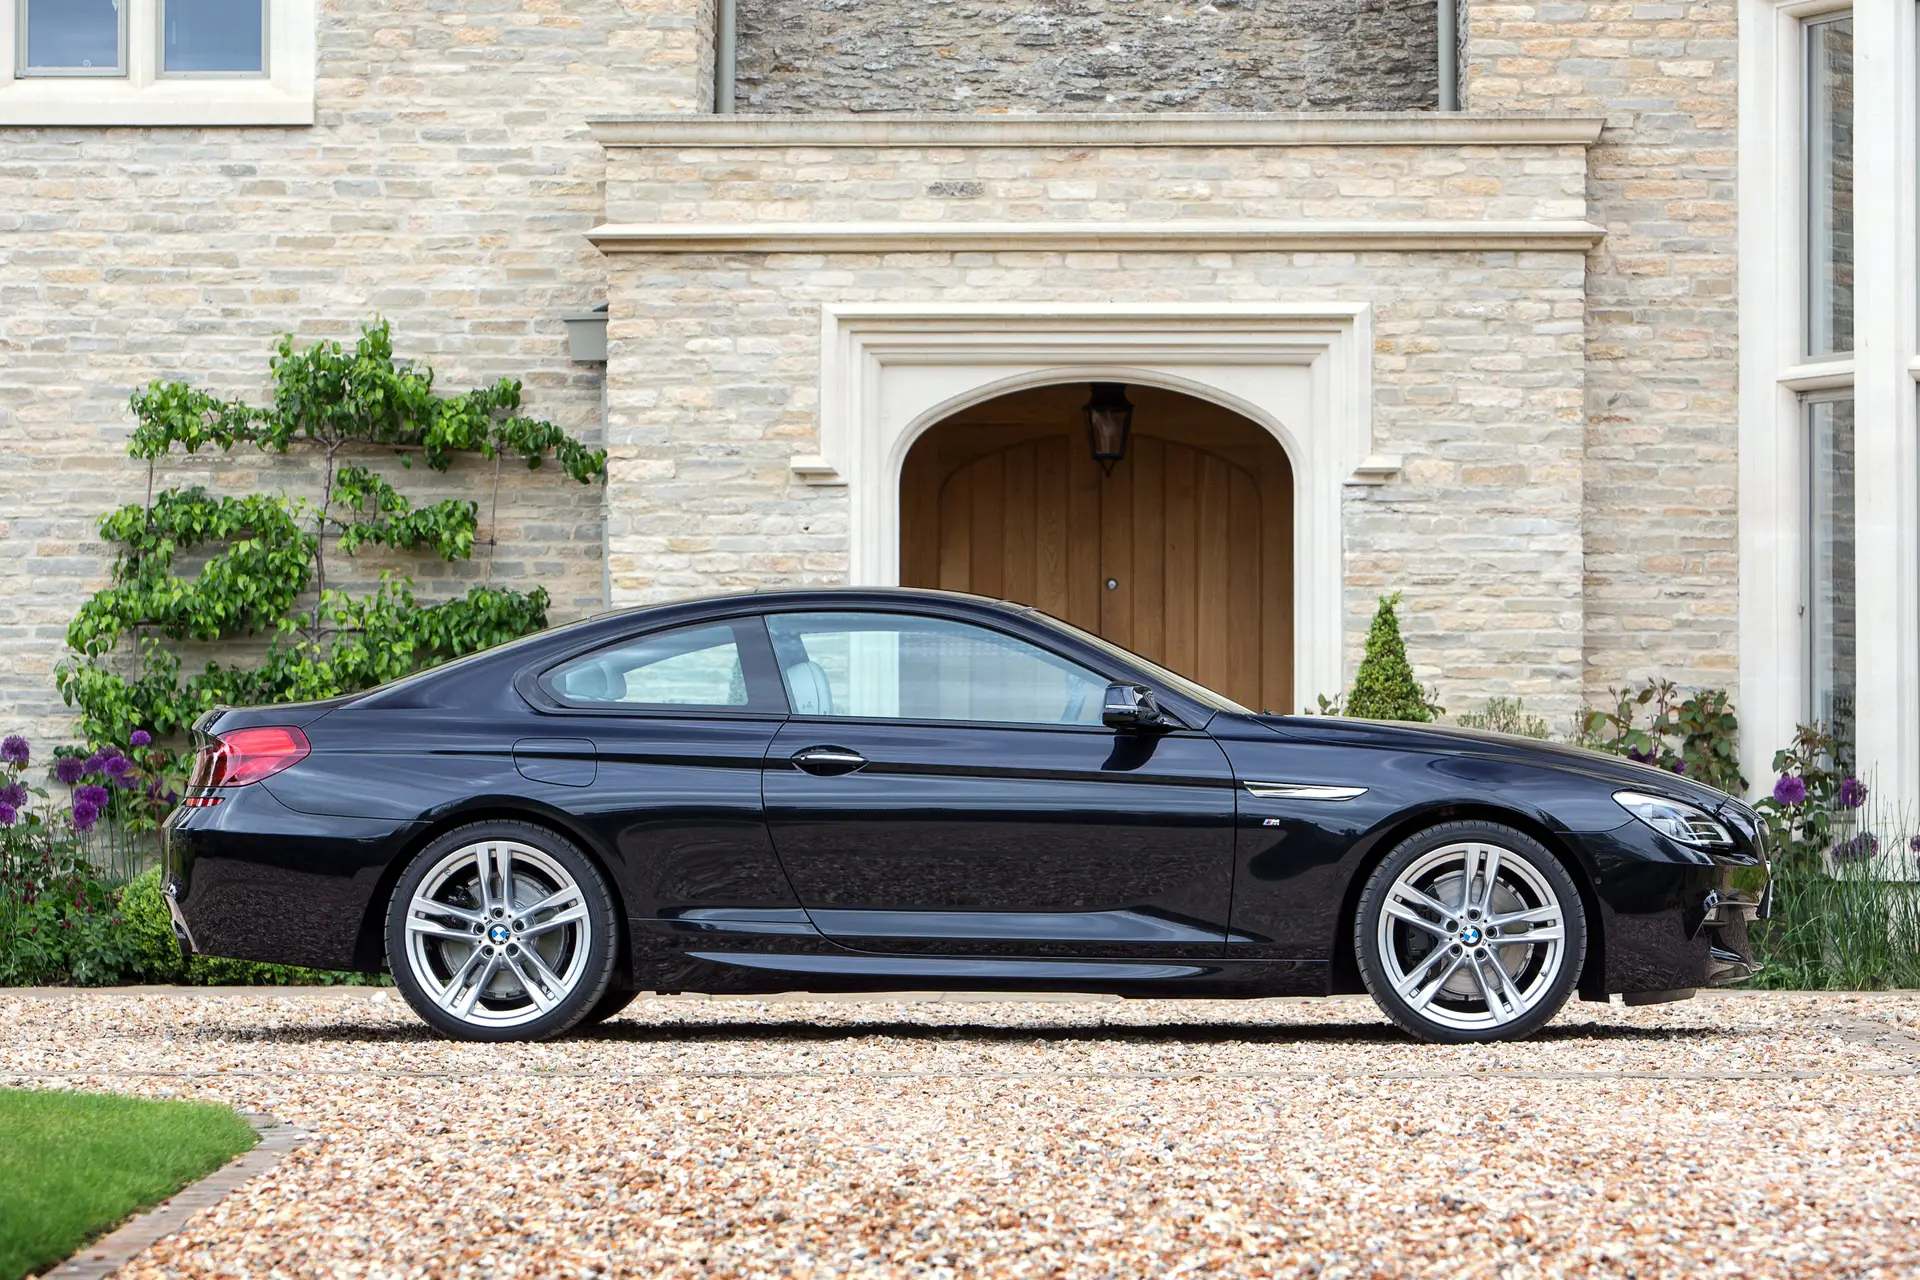 BMW 6 Series (2011-2018) Review: exterior front side of the BMW 6 Series